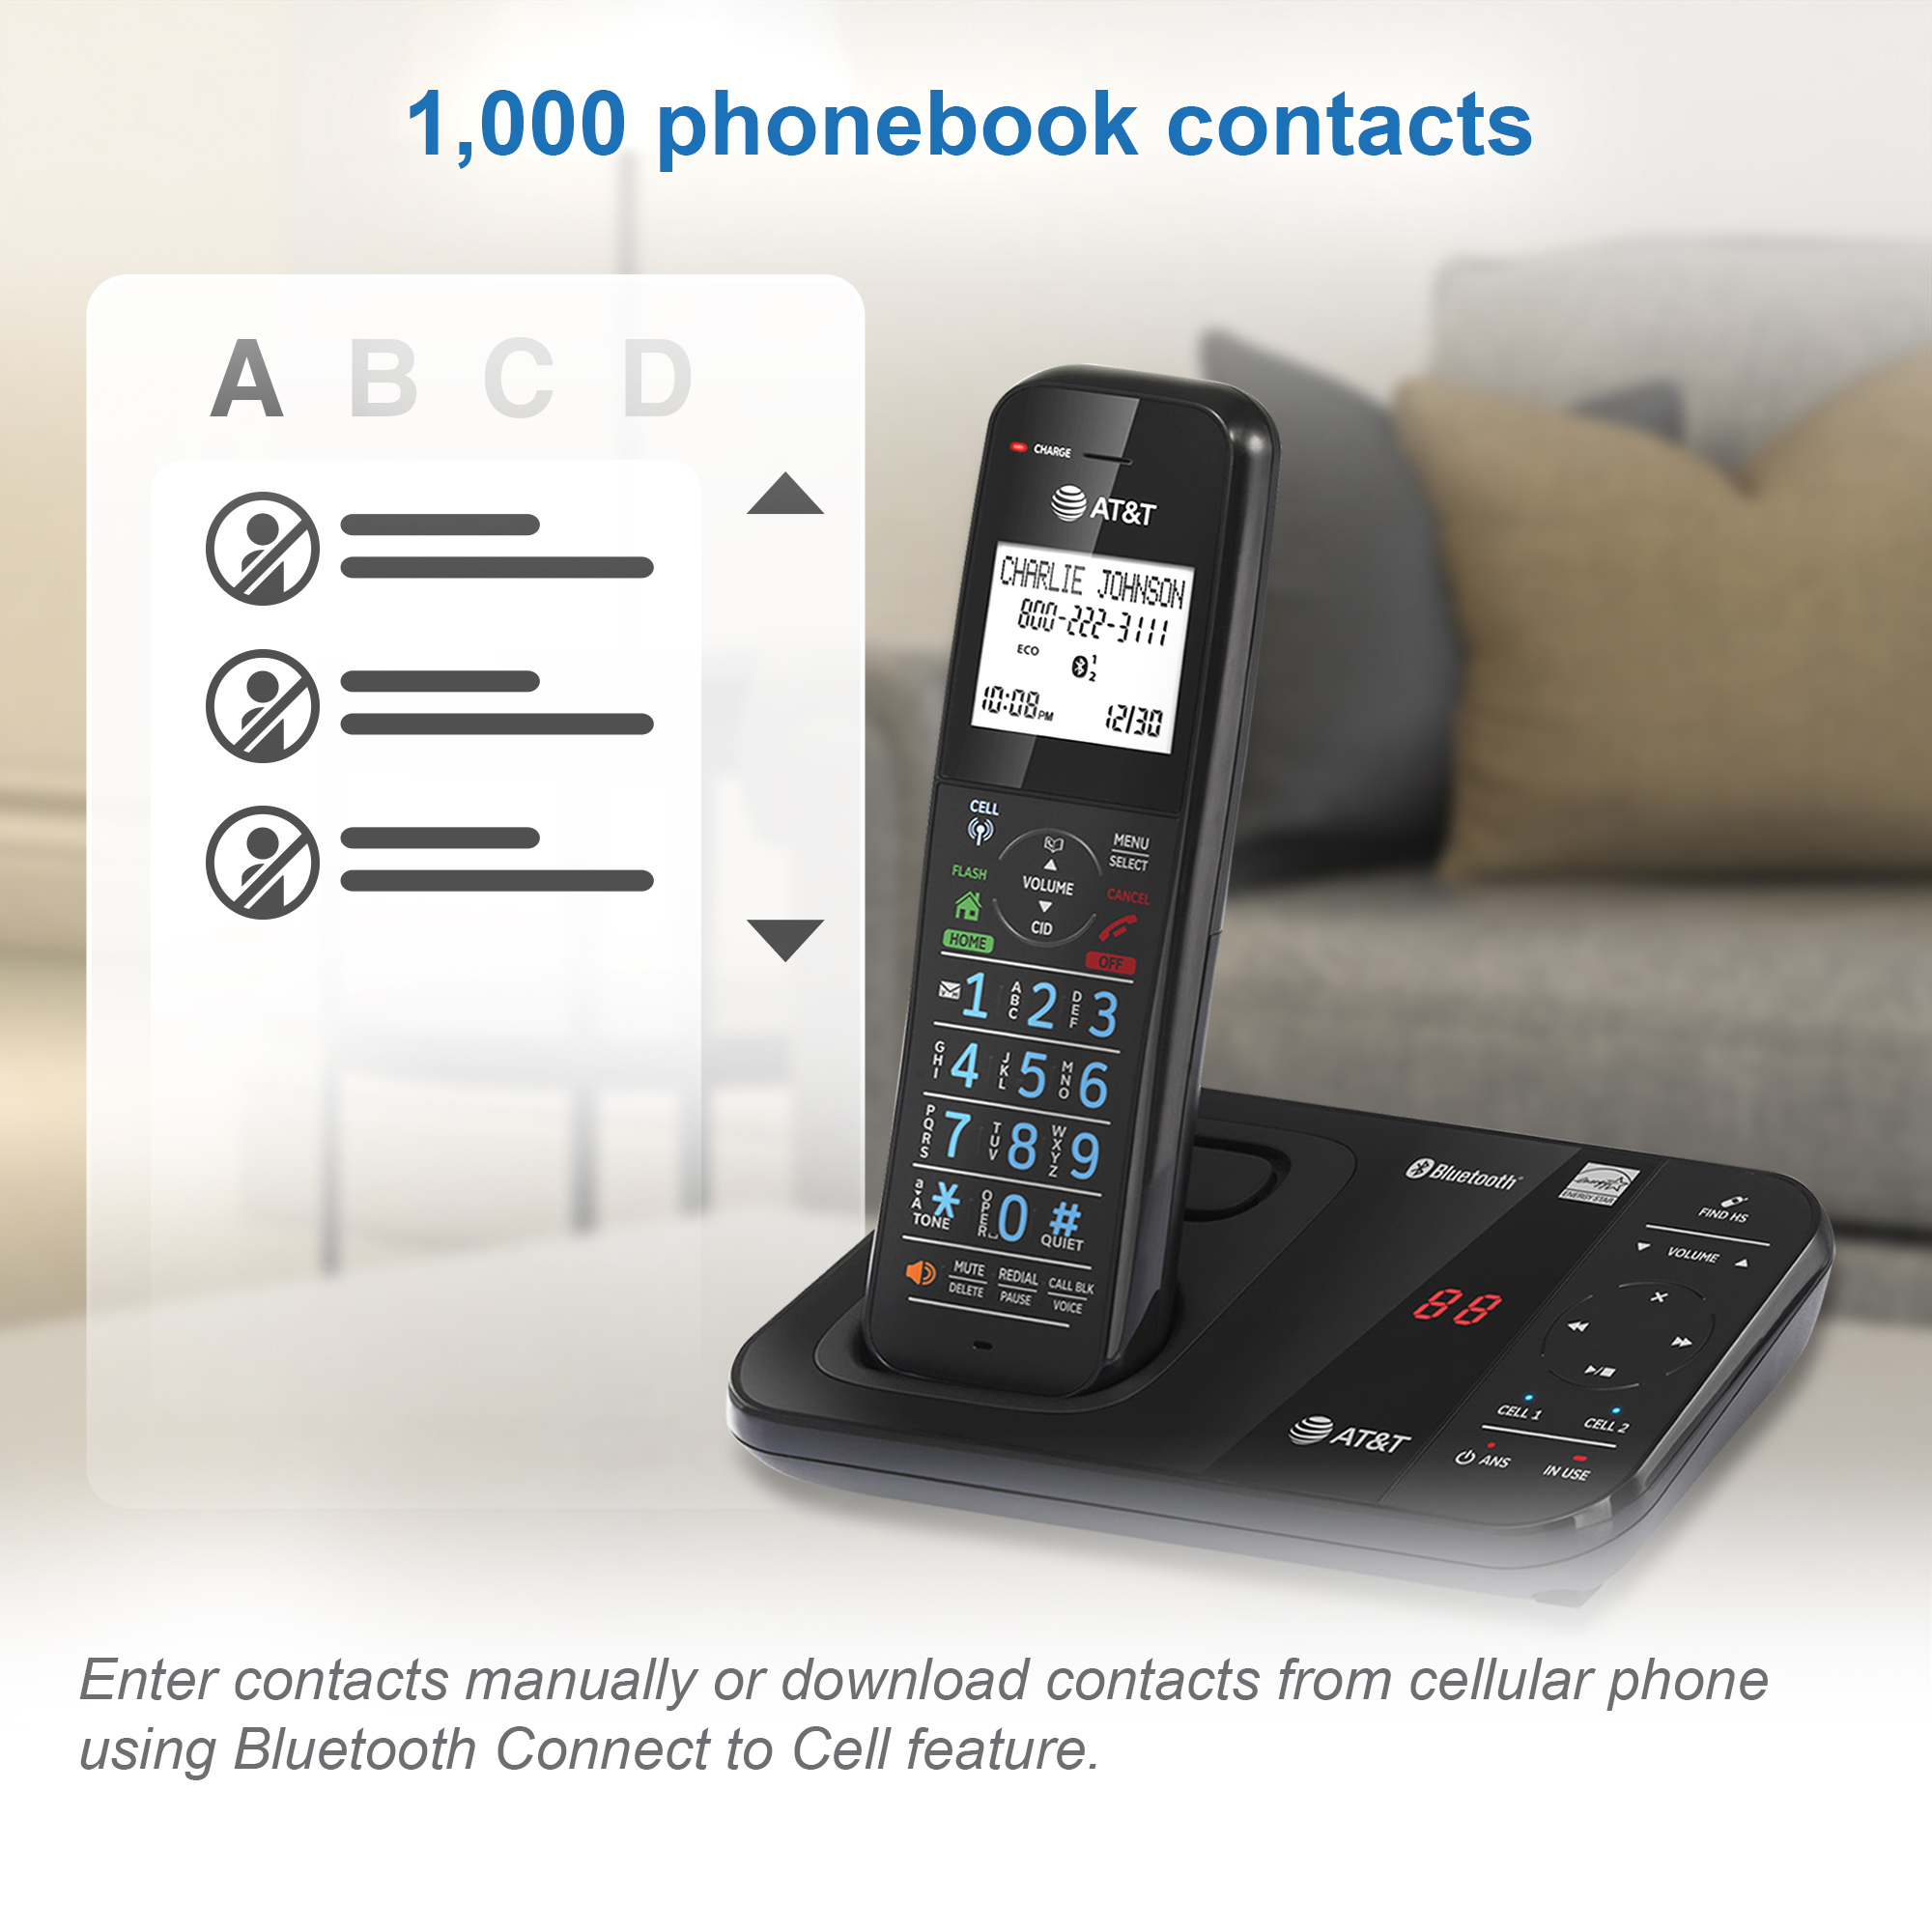 2-Handset Expandable Antibacterial Plastic Cordless Phone with Bluetooth Connect to Cell, Smart Call Blocker and Answering System - view 13